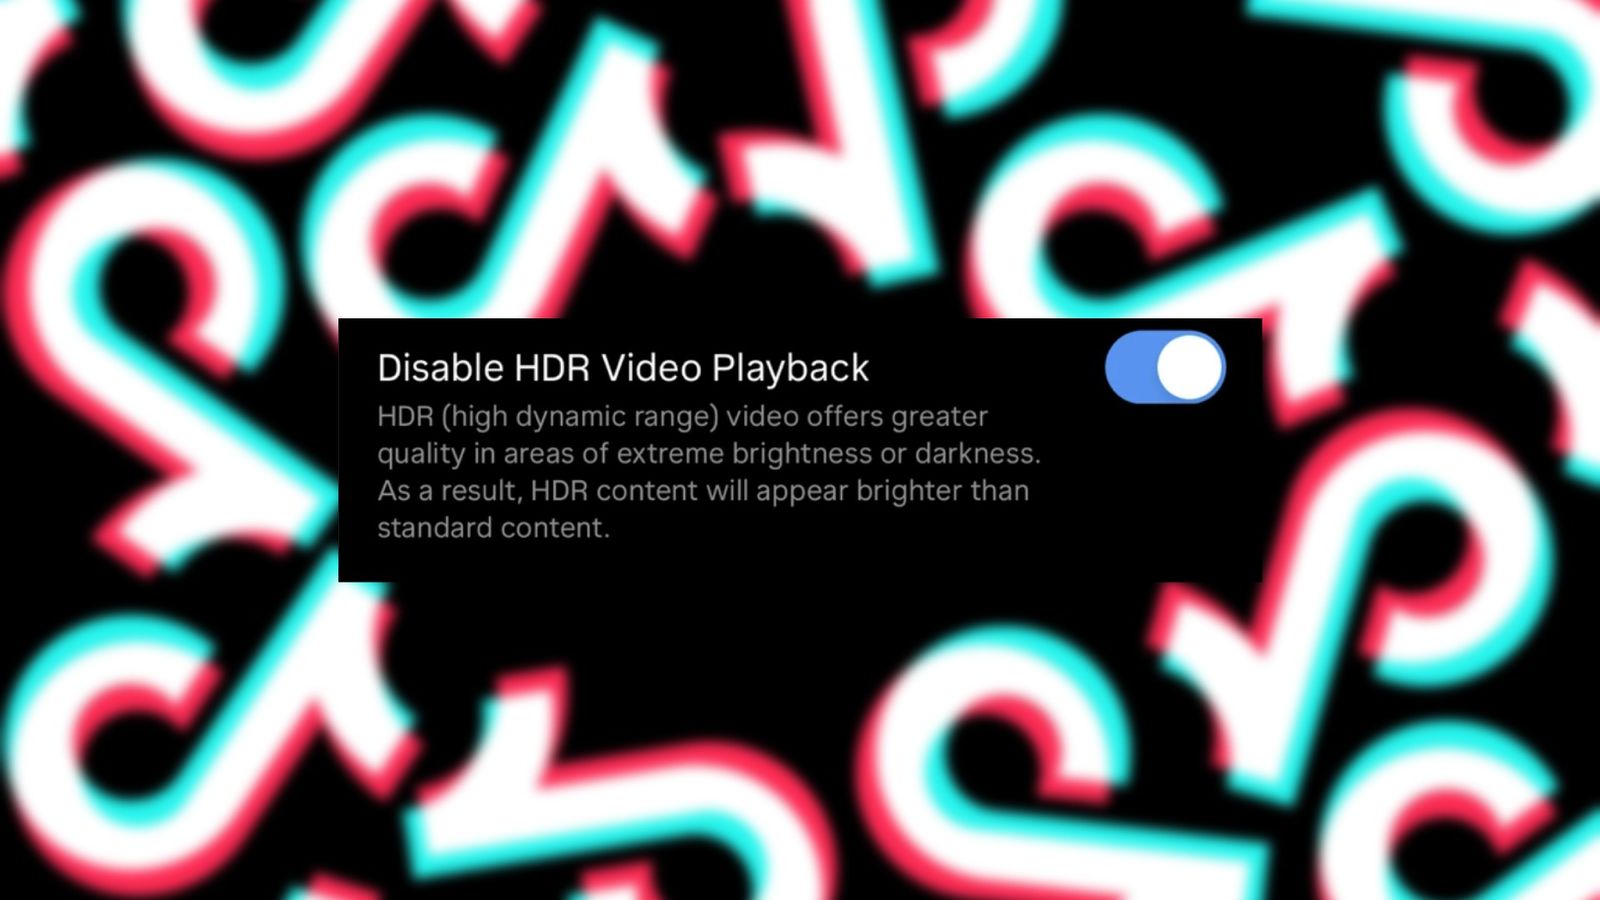 An image with TikTok logos and an option to disable HDR video playback - turn off HDR on TikTok 